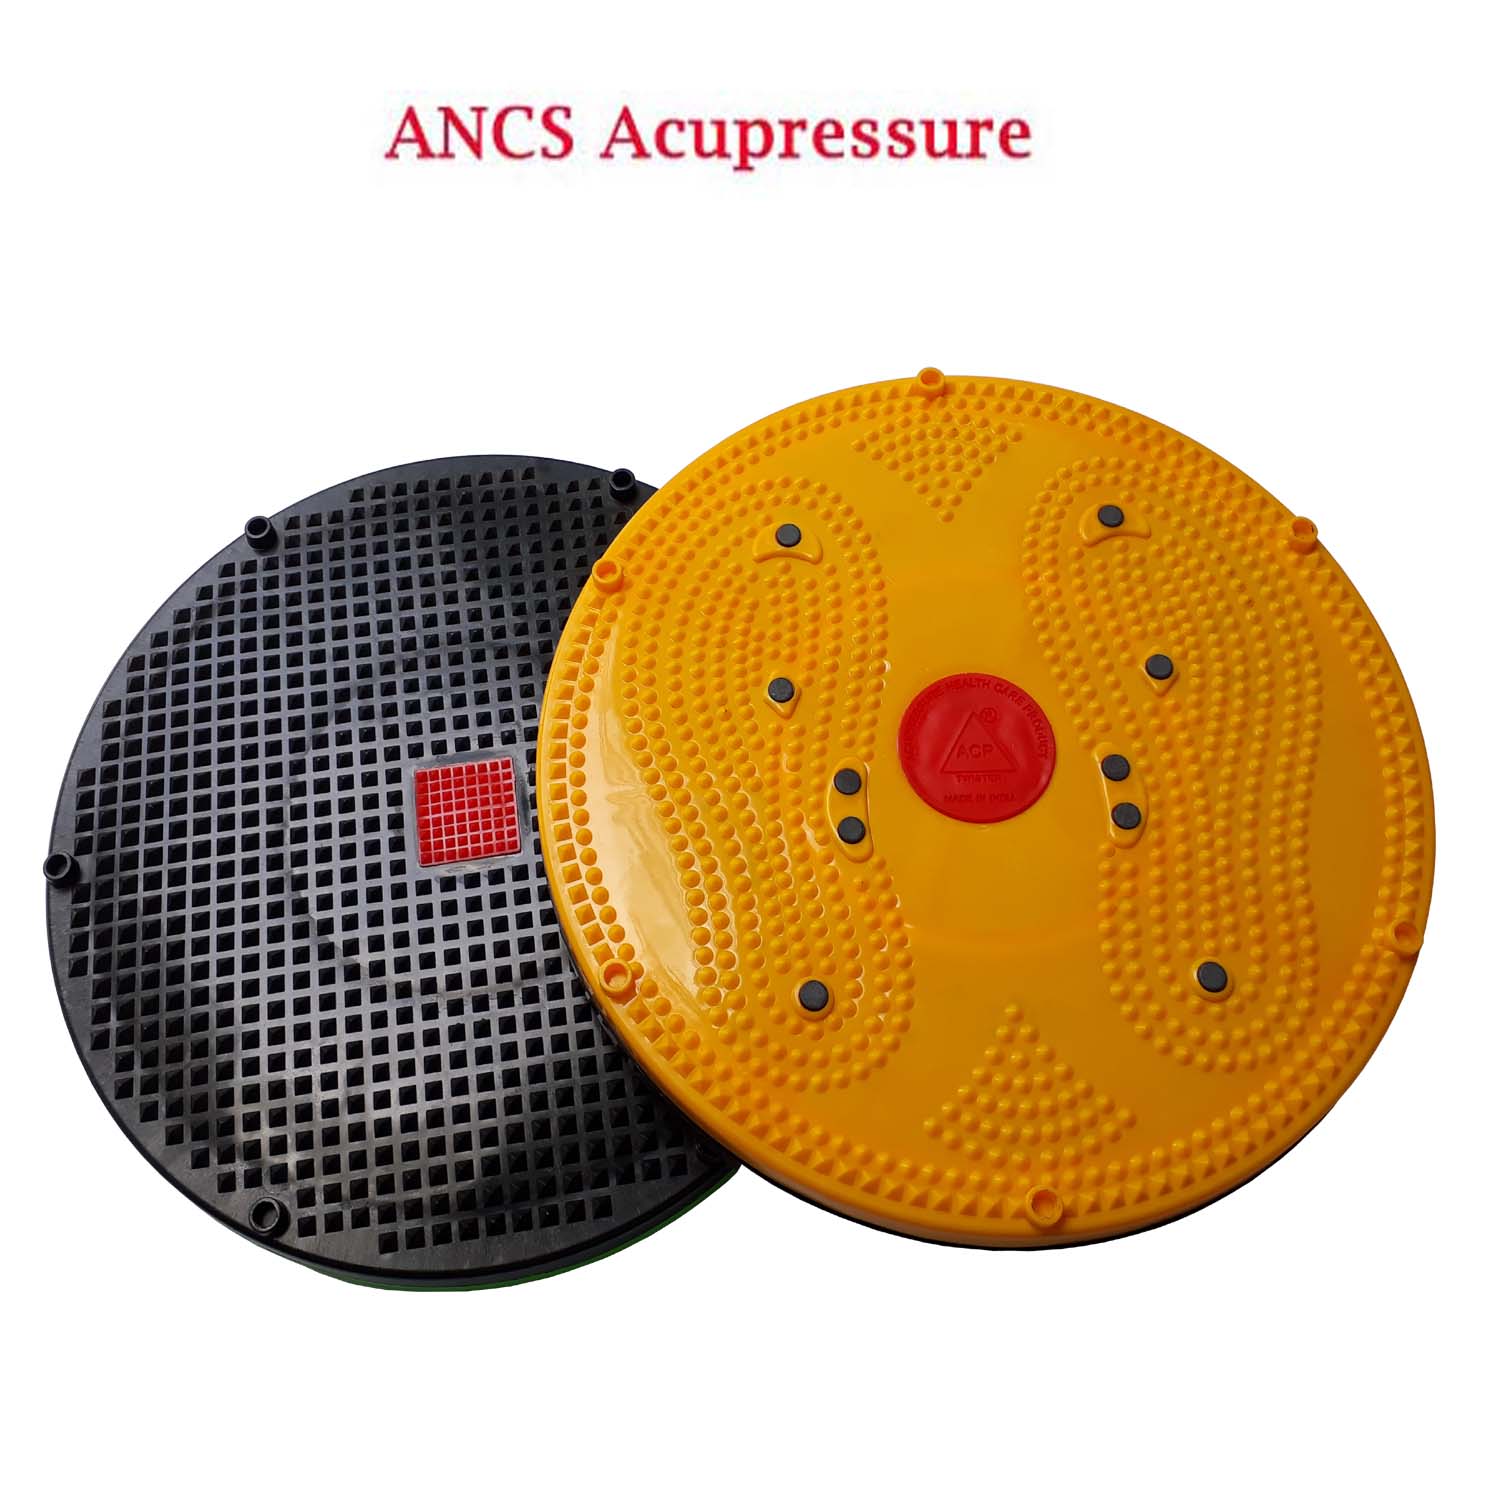 ANCS Acupressure twister big 2 in1 yellow 